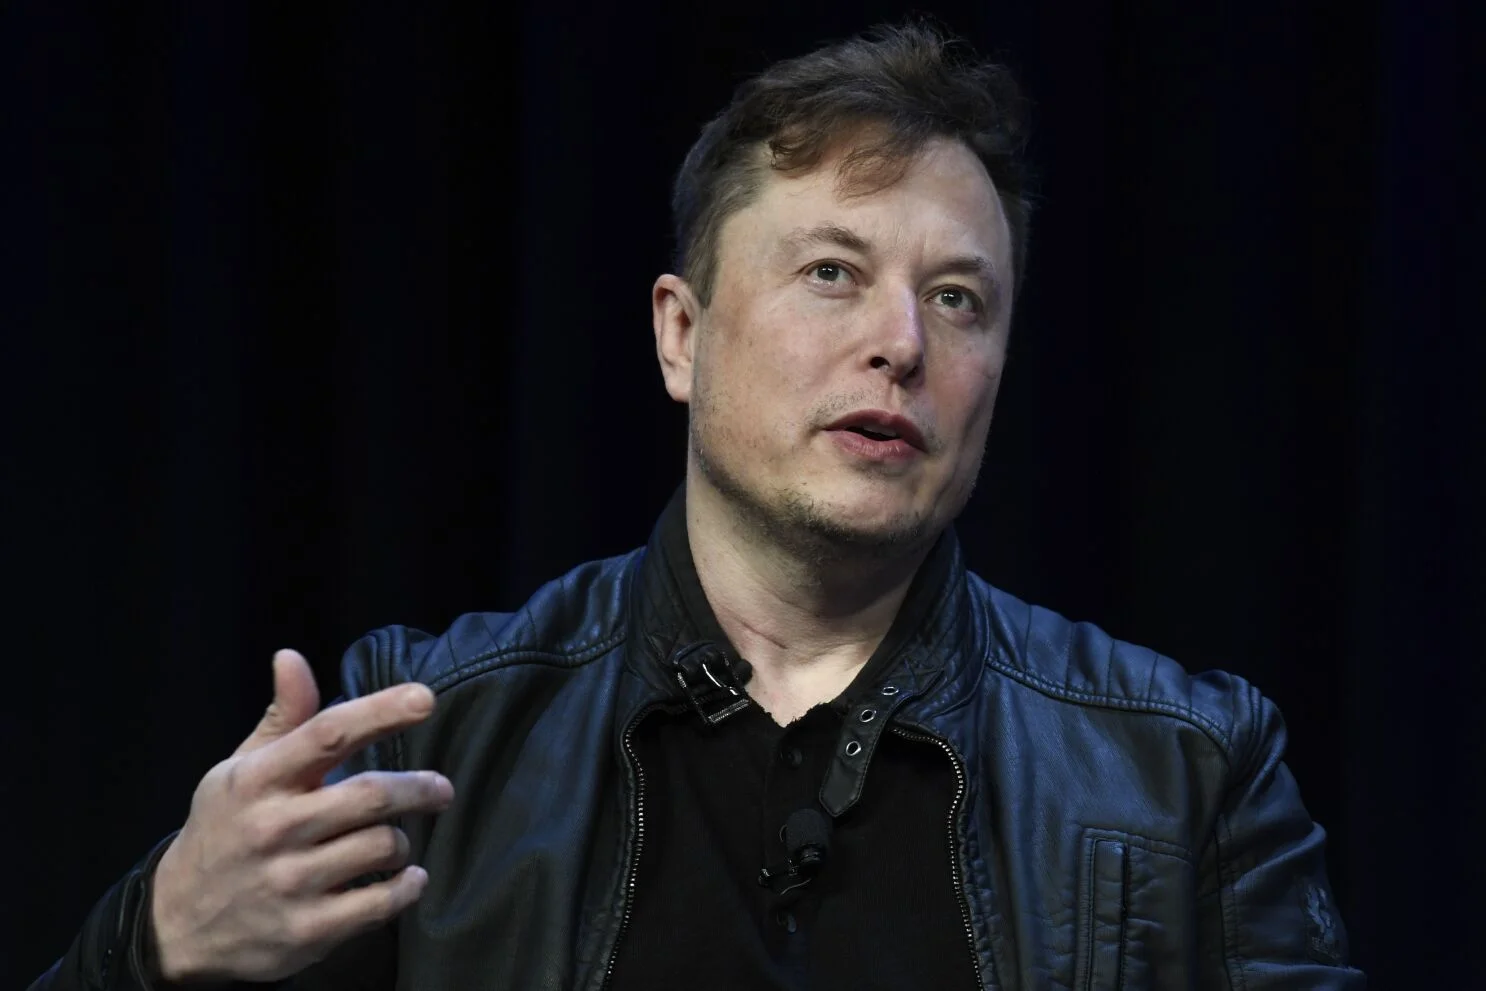 elon-musk-discusses-electric-vehicles-and-ai-with-us-senate-leader-schumer